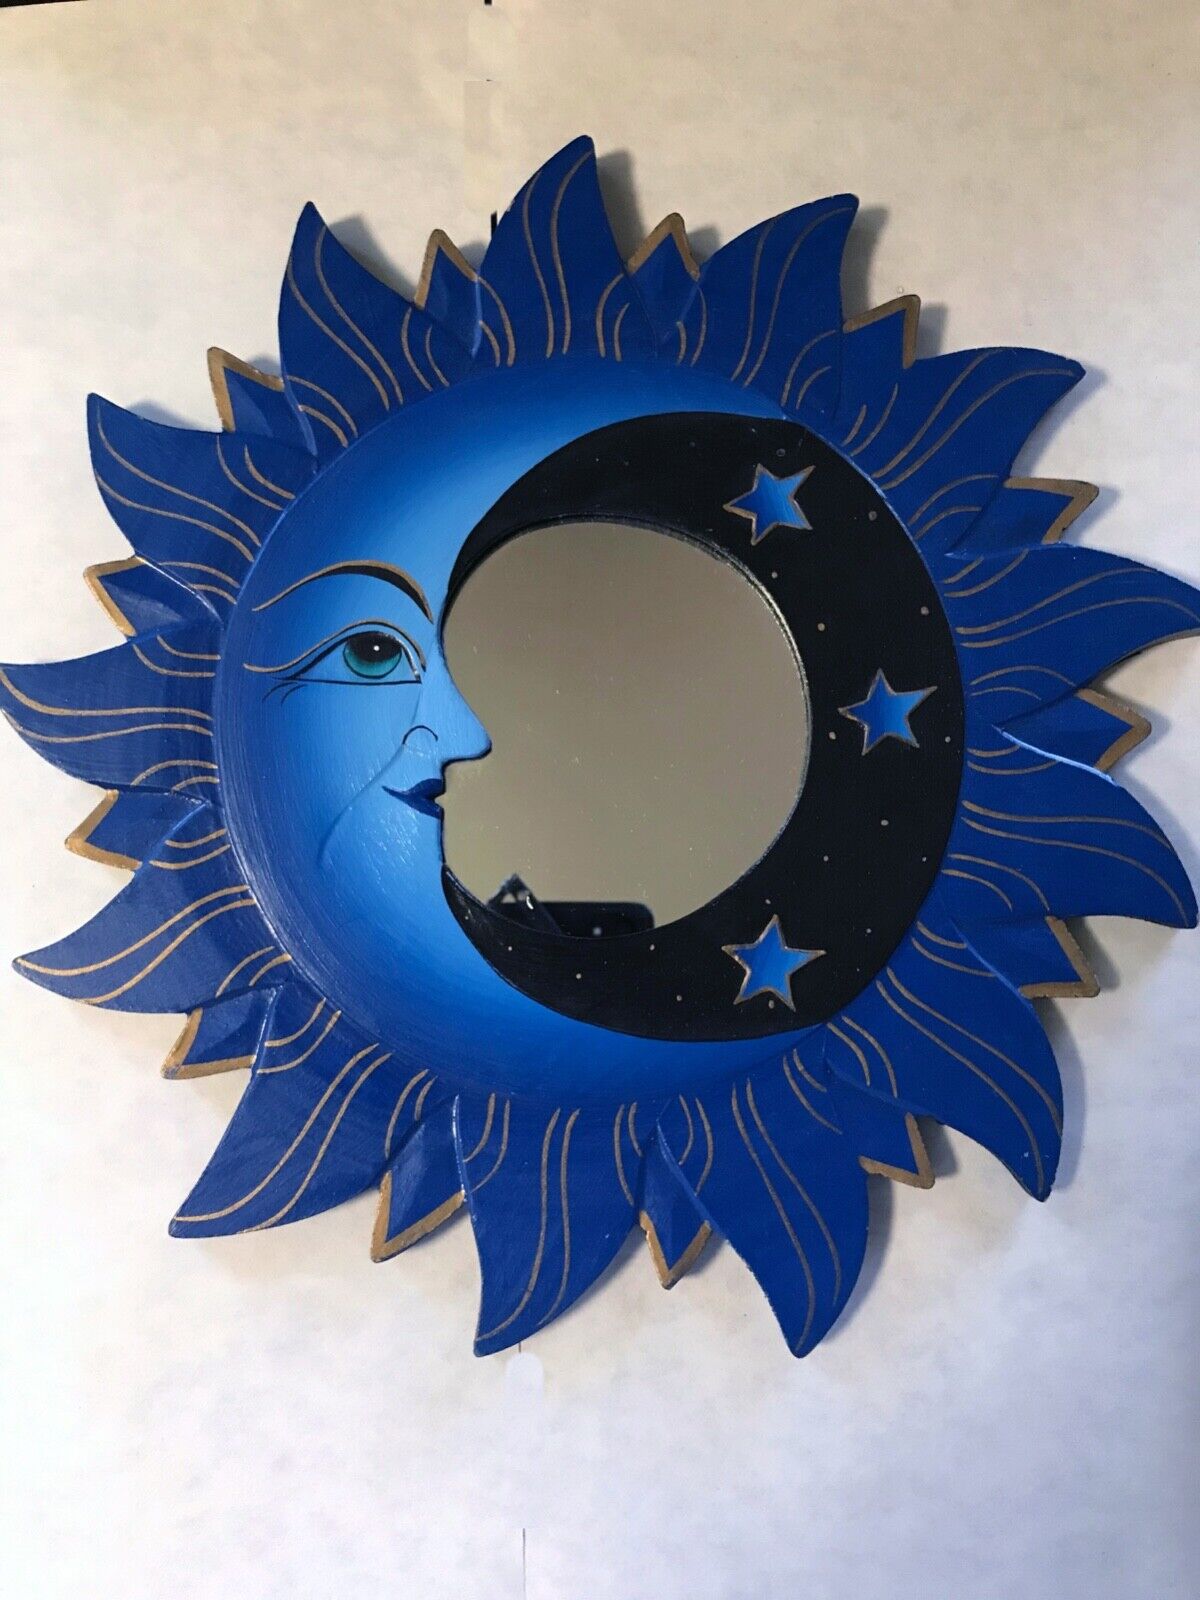 VTG MOON & STARS MIRROR 12” Hand Carved & Painted NEW GRAY by Wendy Aston Martin